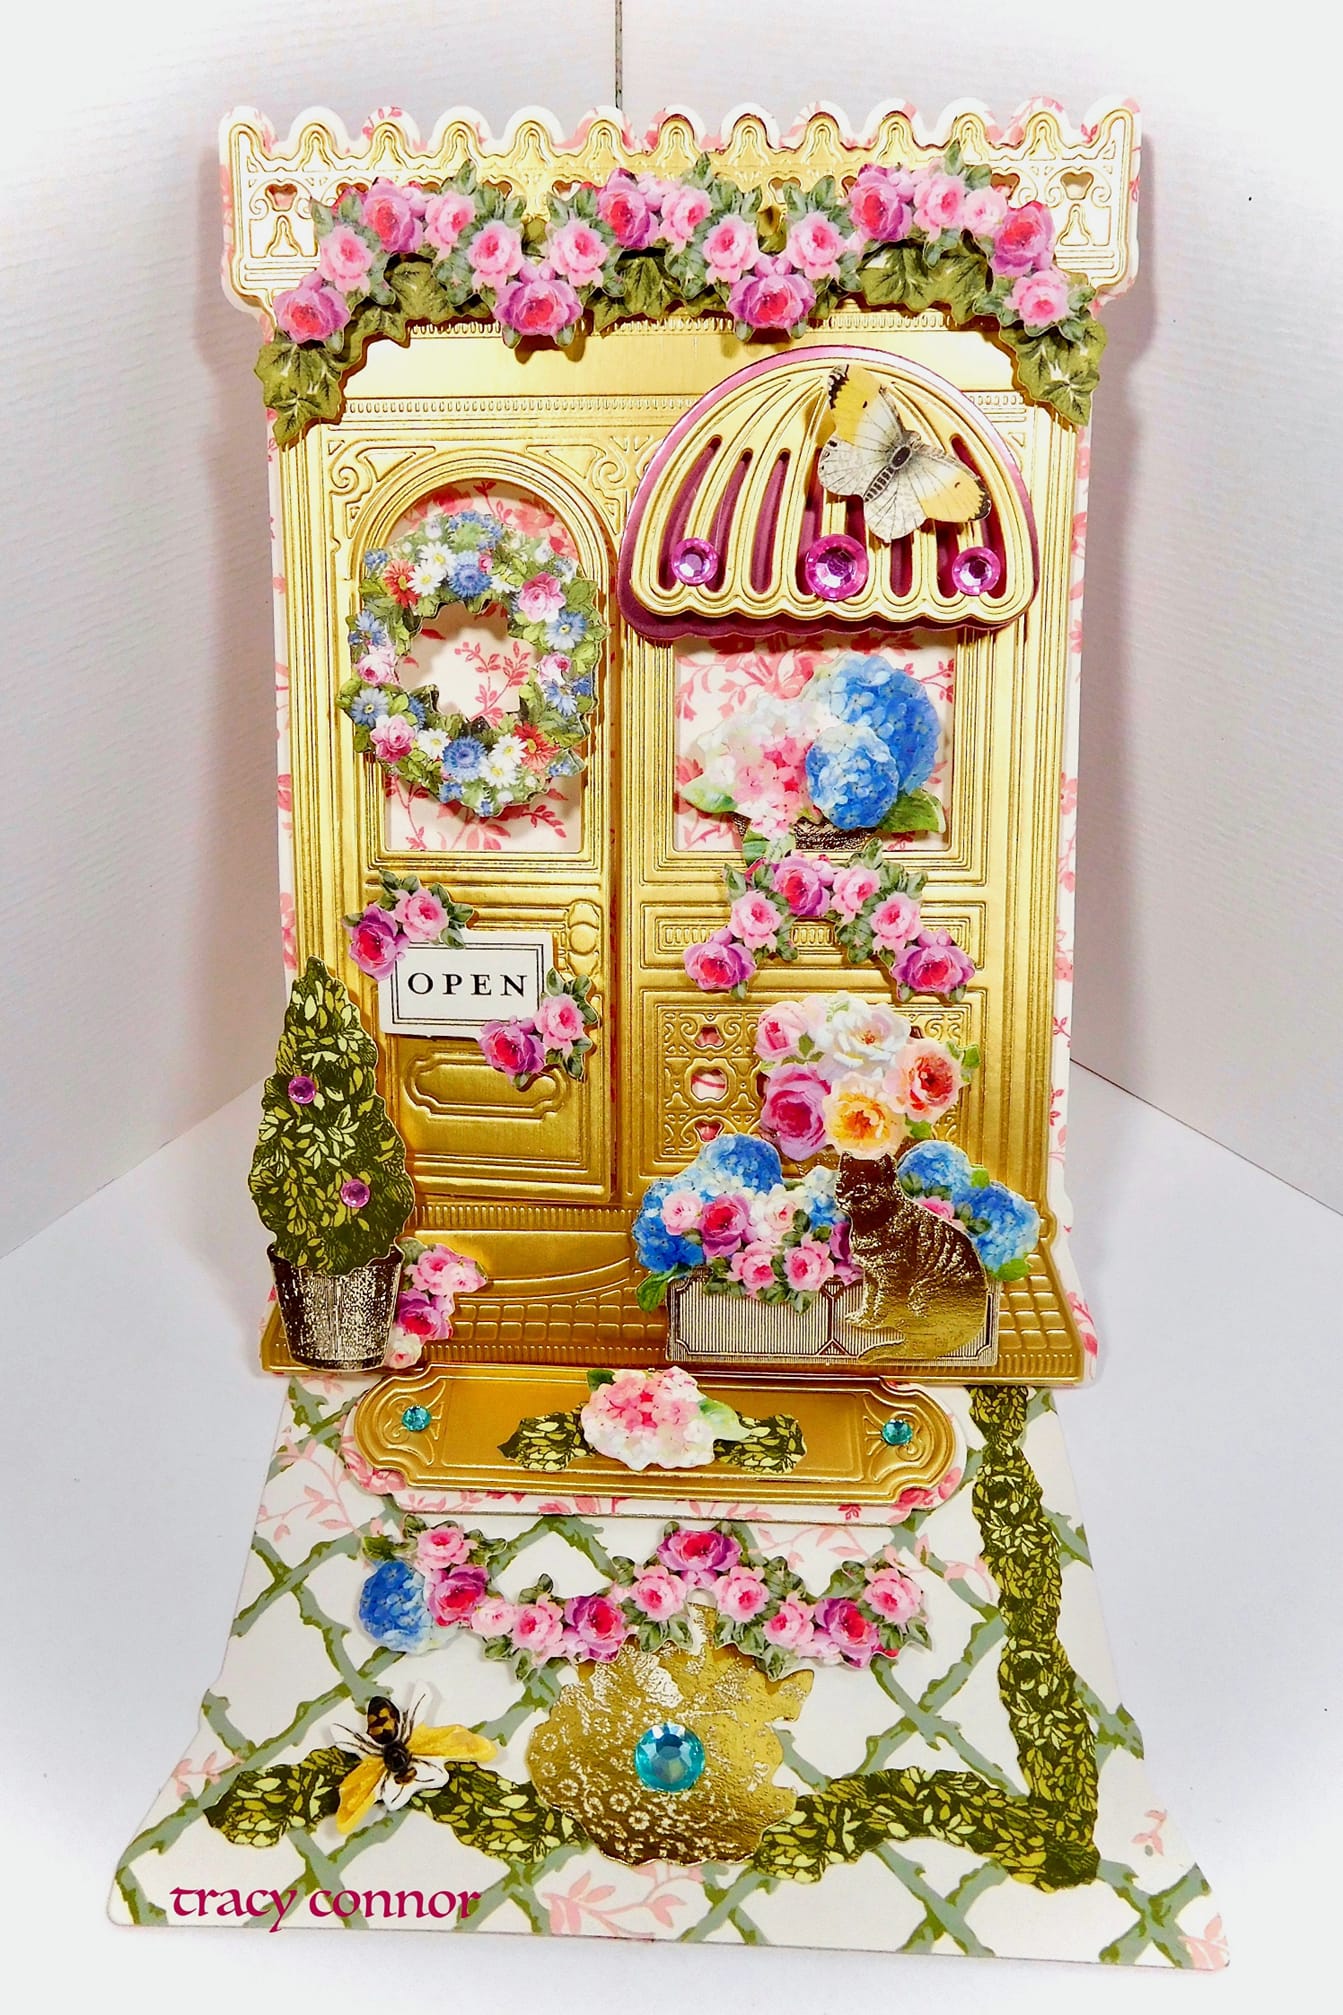 a close up of a toy machine with flowers on it.